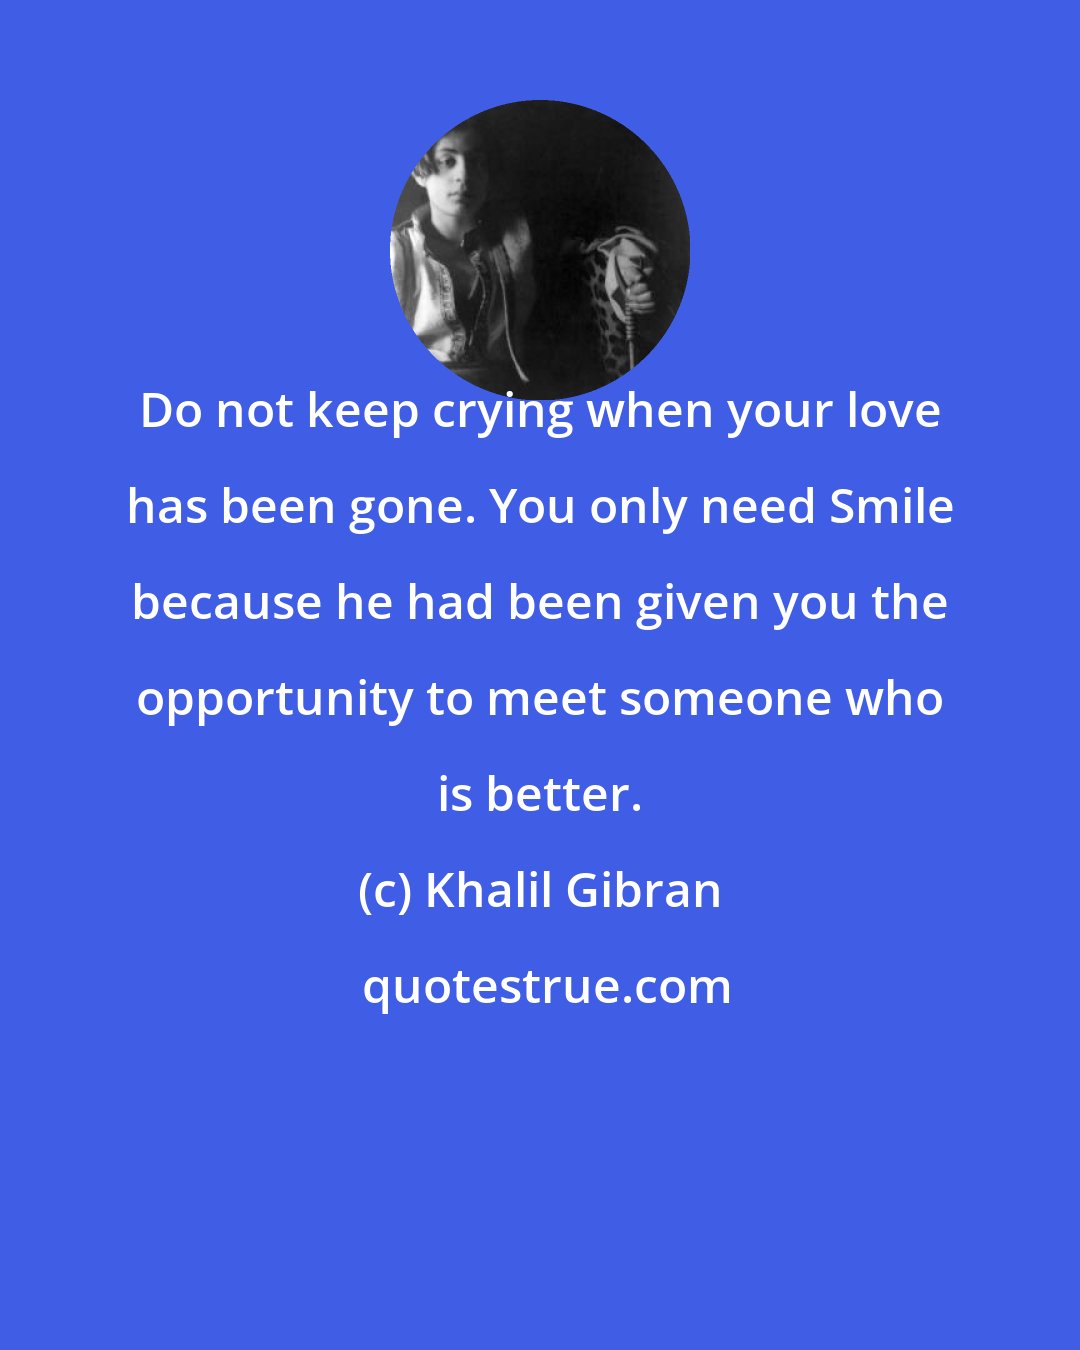 Khalil Gibran: Do not keep crying when your love has been gone. You only need Smile because he had been given you the opportunity to meet someone who is better.